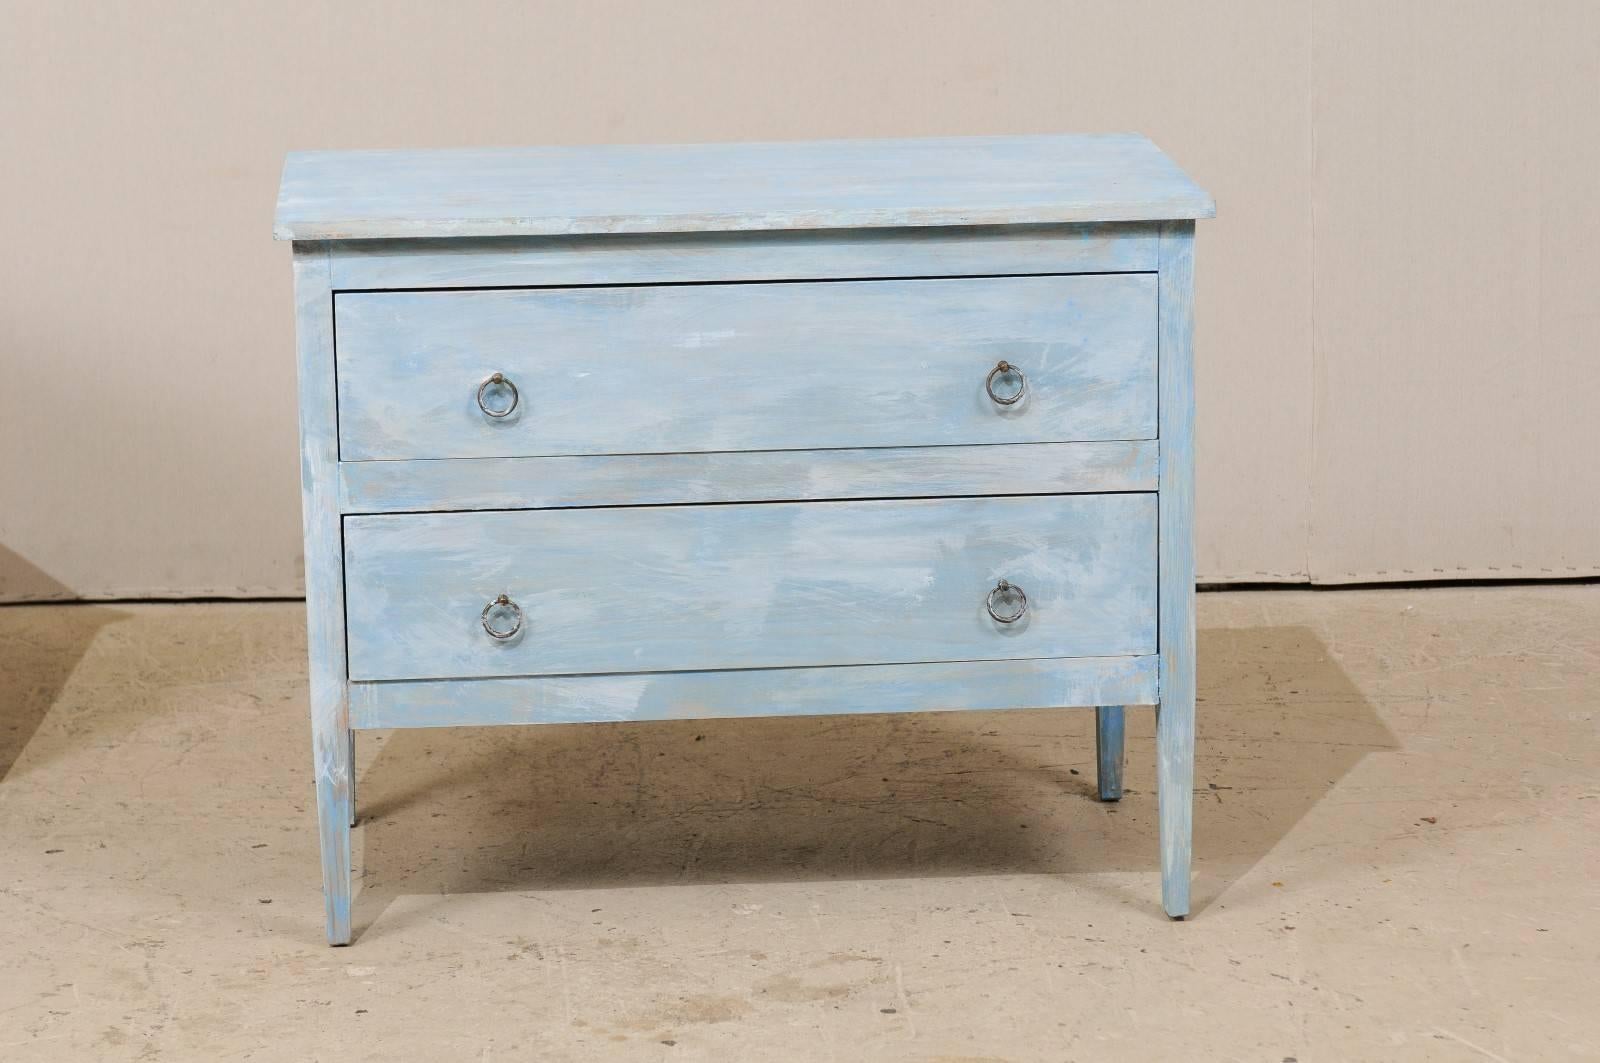 Carved Pair of Painted Wood Two-Drawer Chests in Grey, Light Blue and White Color